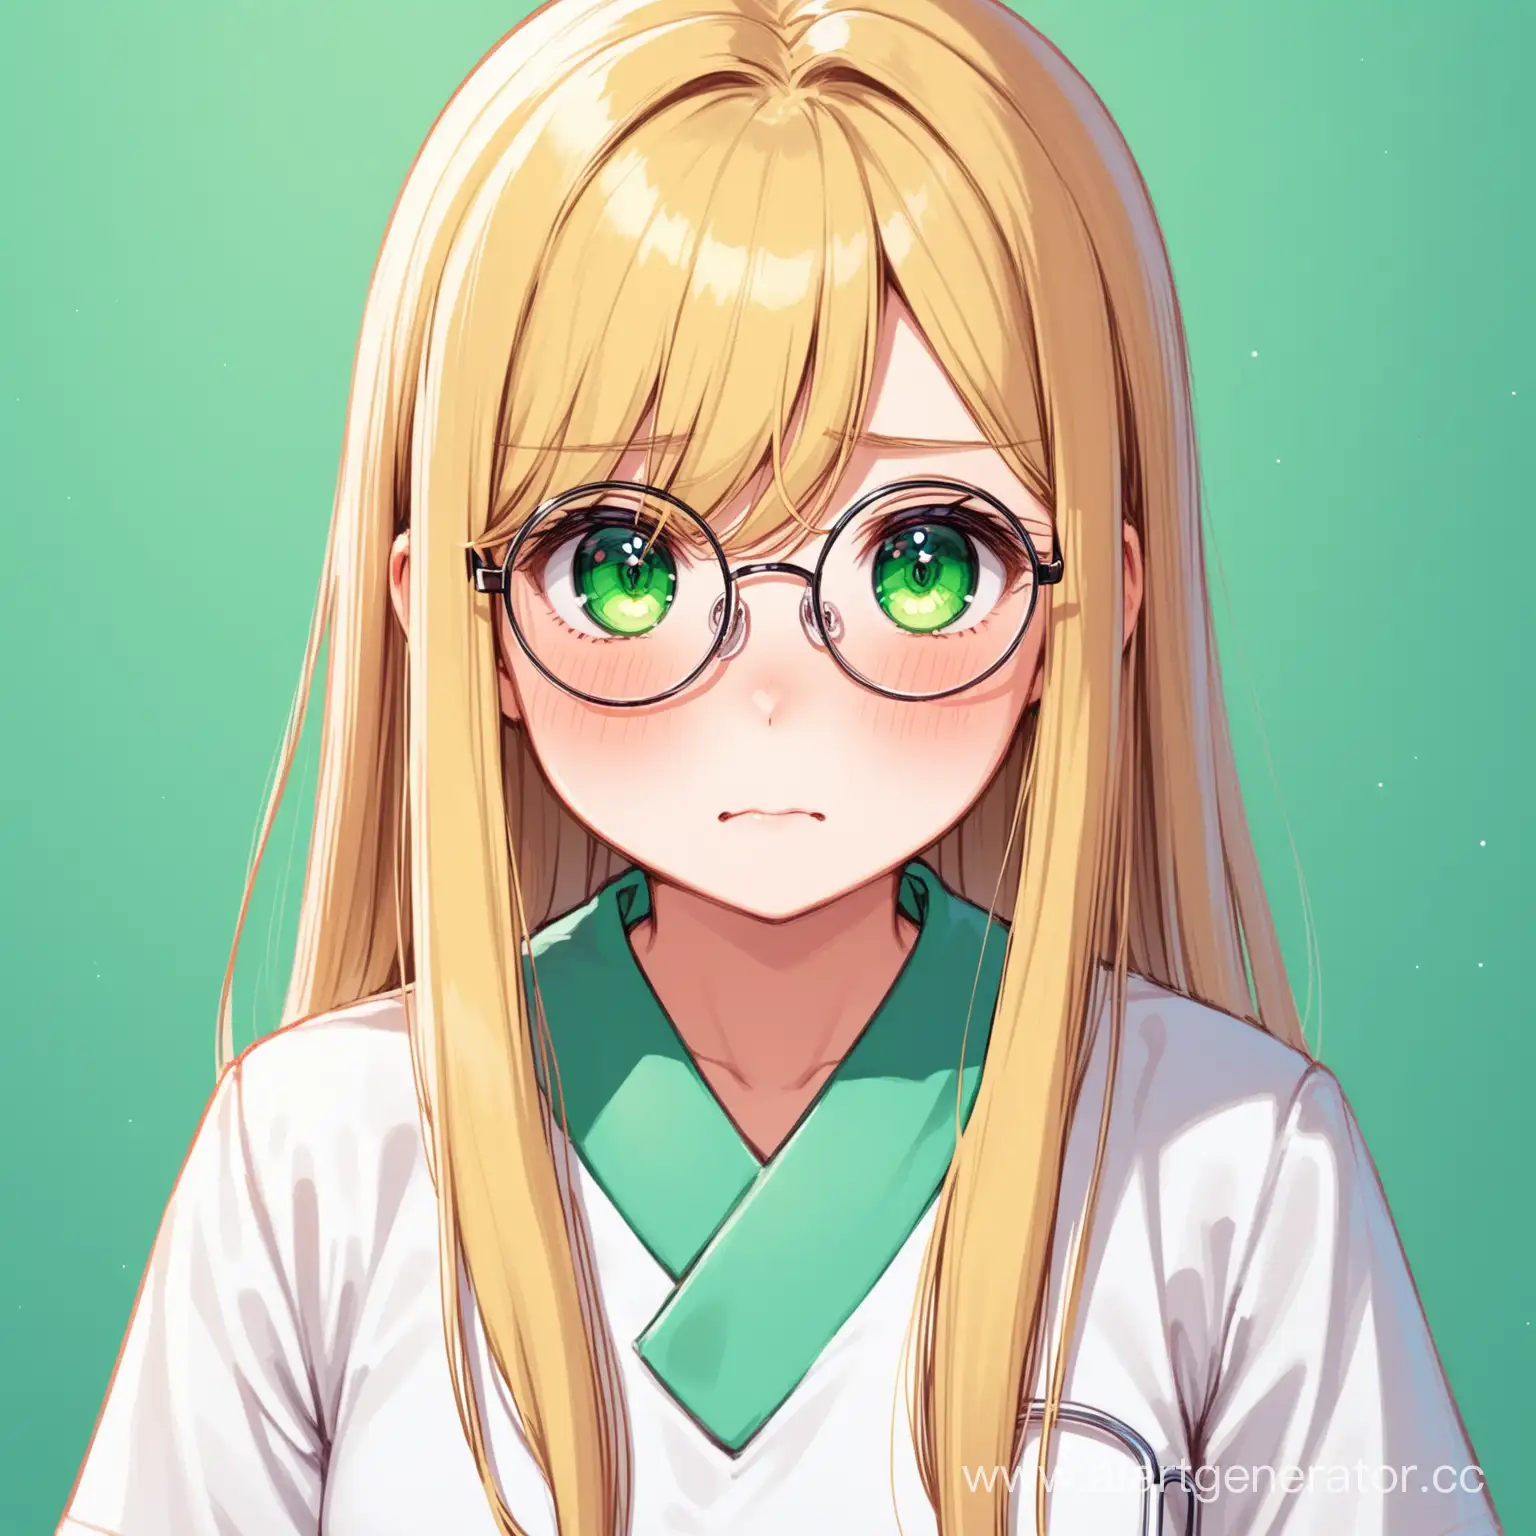 Adorable-Blonde-Girl-in-Medical-Dress-and-Glasses